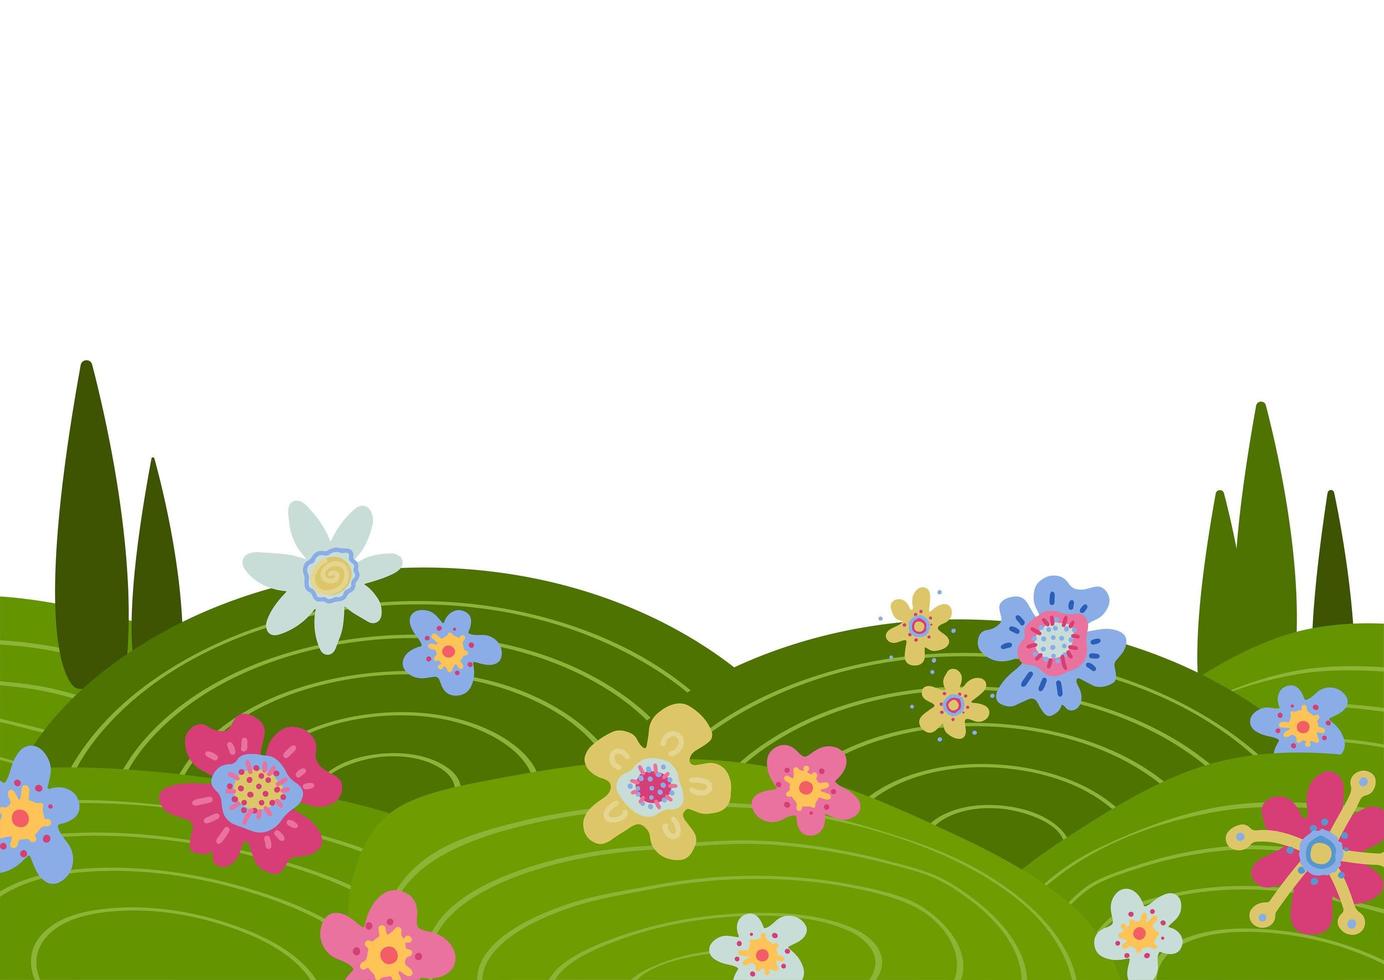 Doodle background with hand drawn green hills and flowers. Creative nature hand drawn illustration of beautiful summer or spring landscape. Flat vector illustration with white space for text.